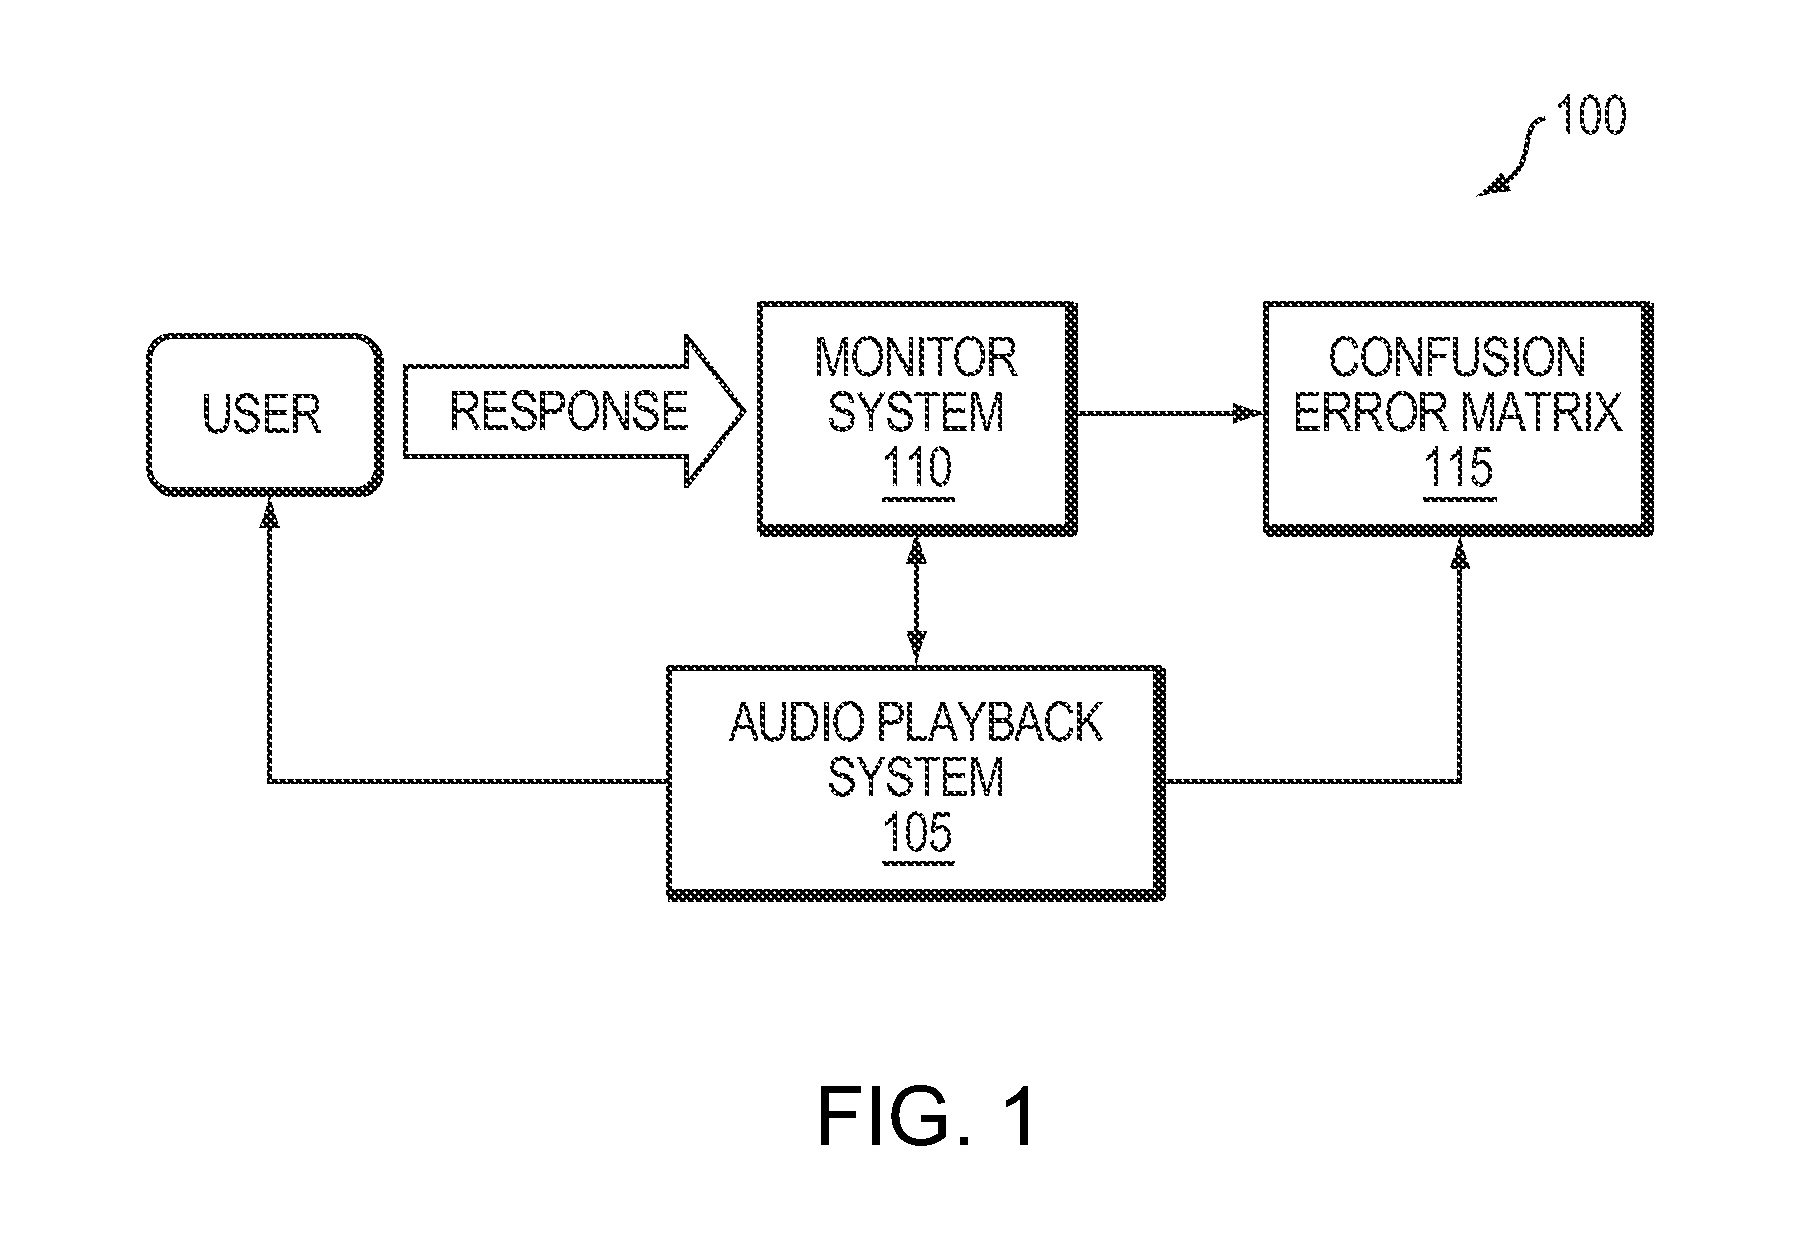 Systems and methods for remotely tuning hearing devices